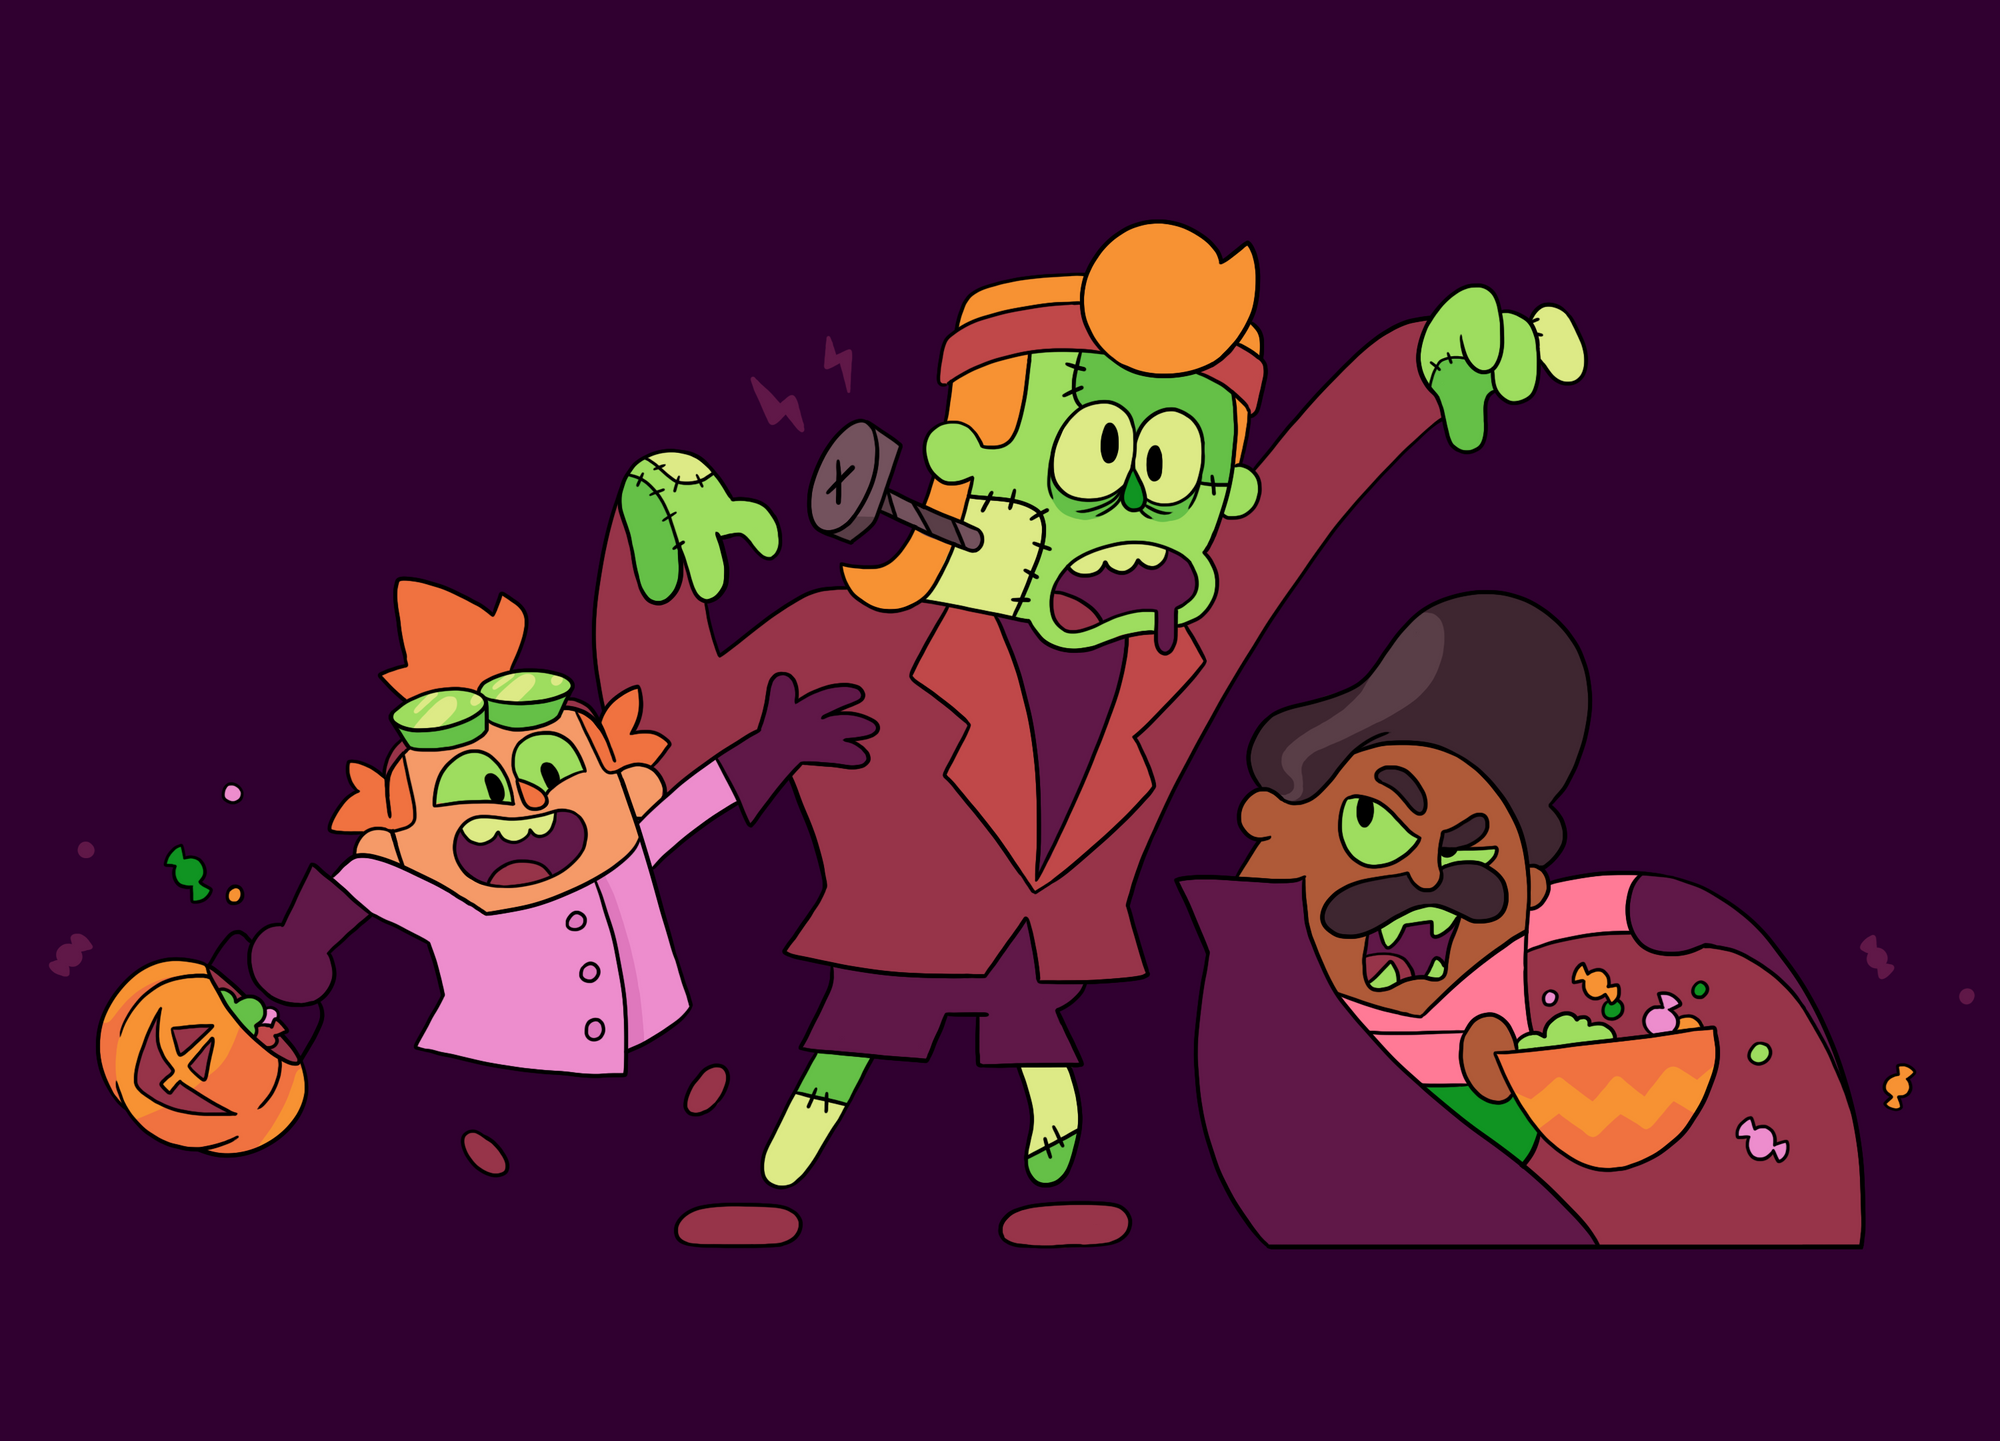 The Duolingo characters Junior, Eddy, and Oscar dressed up like Frankenstein-esque monsters